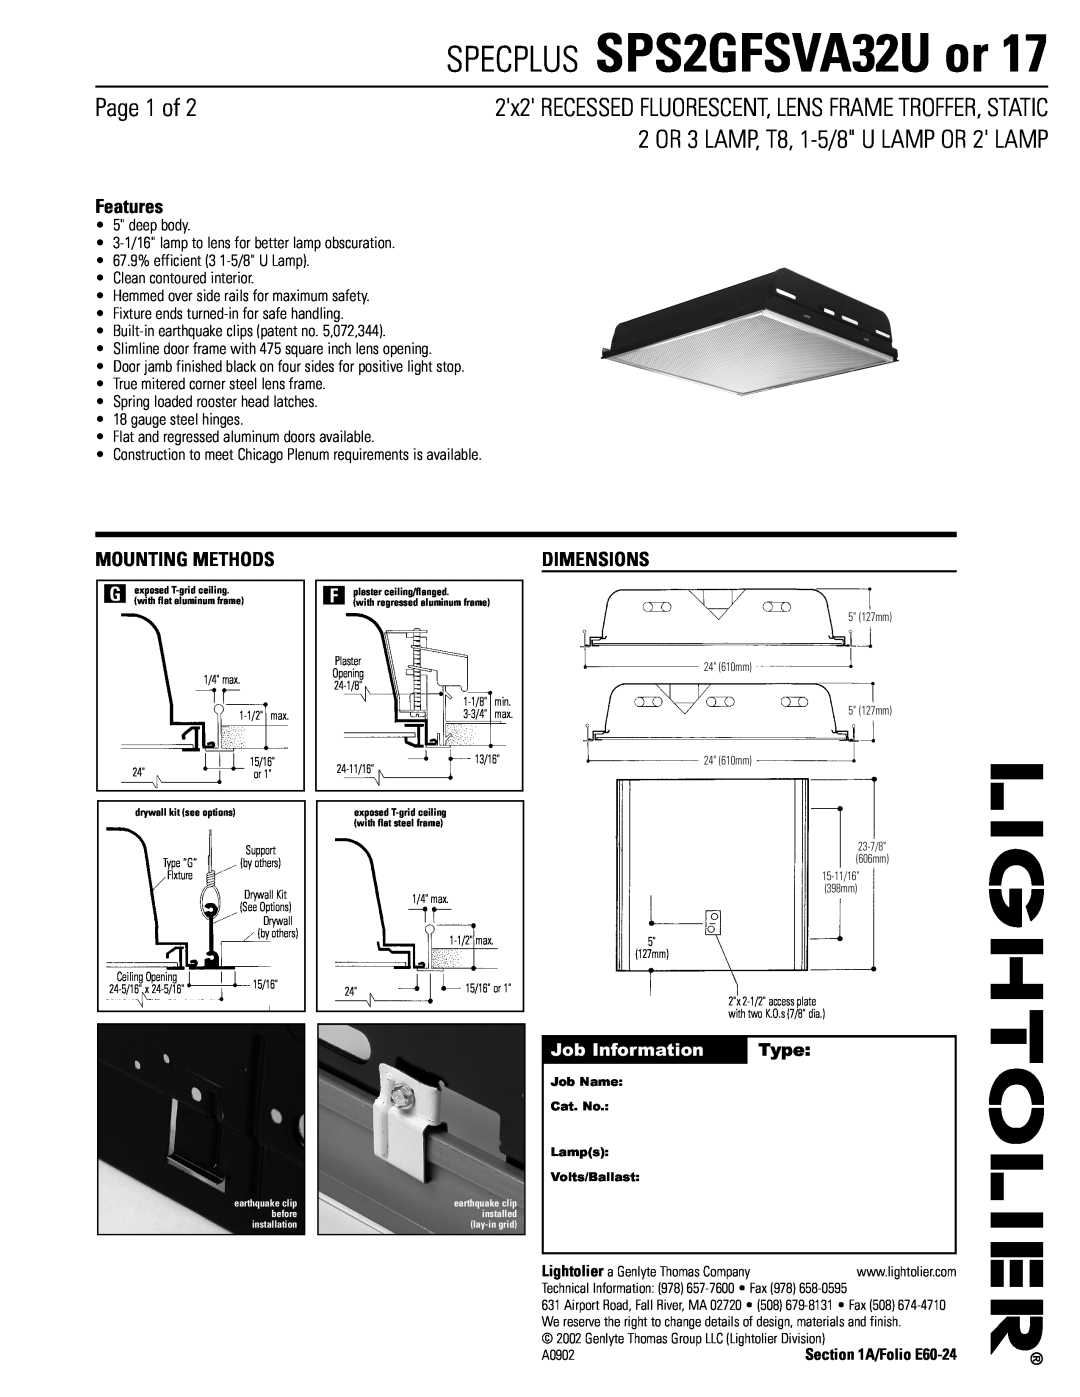 Lightolier dimensions SPECPLUS SPS2GFSVA32U or, Page 1 of, 2 OR 3 LAMP, T8, 1-5/8U LAMP OR 2 LAMP, Features, Dimensions 